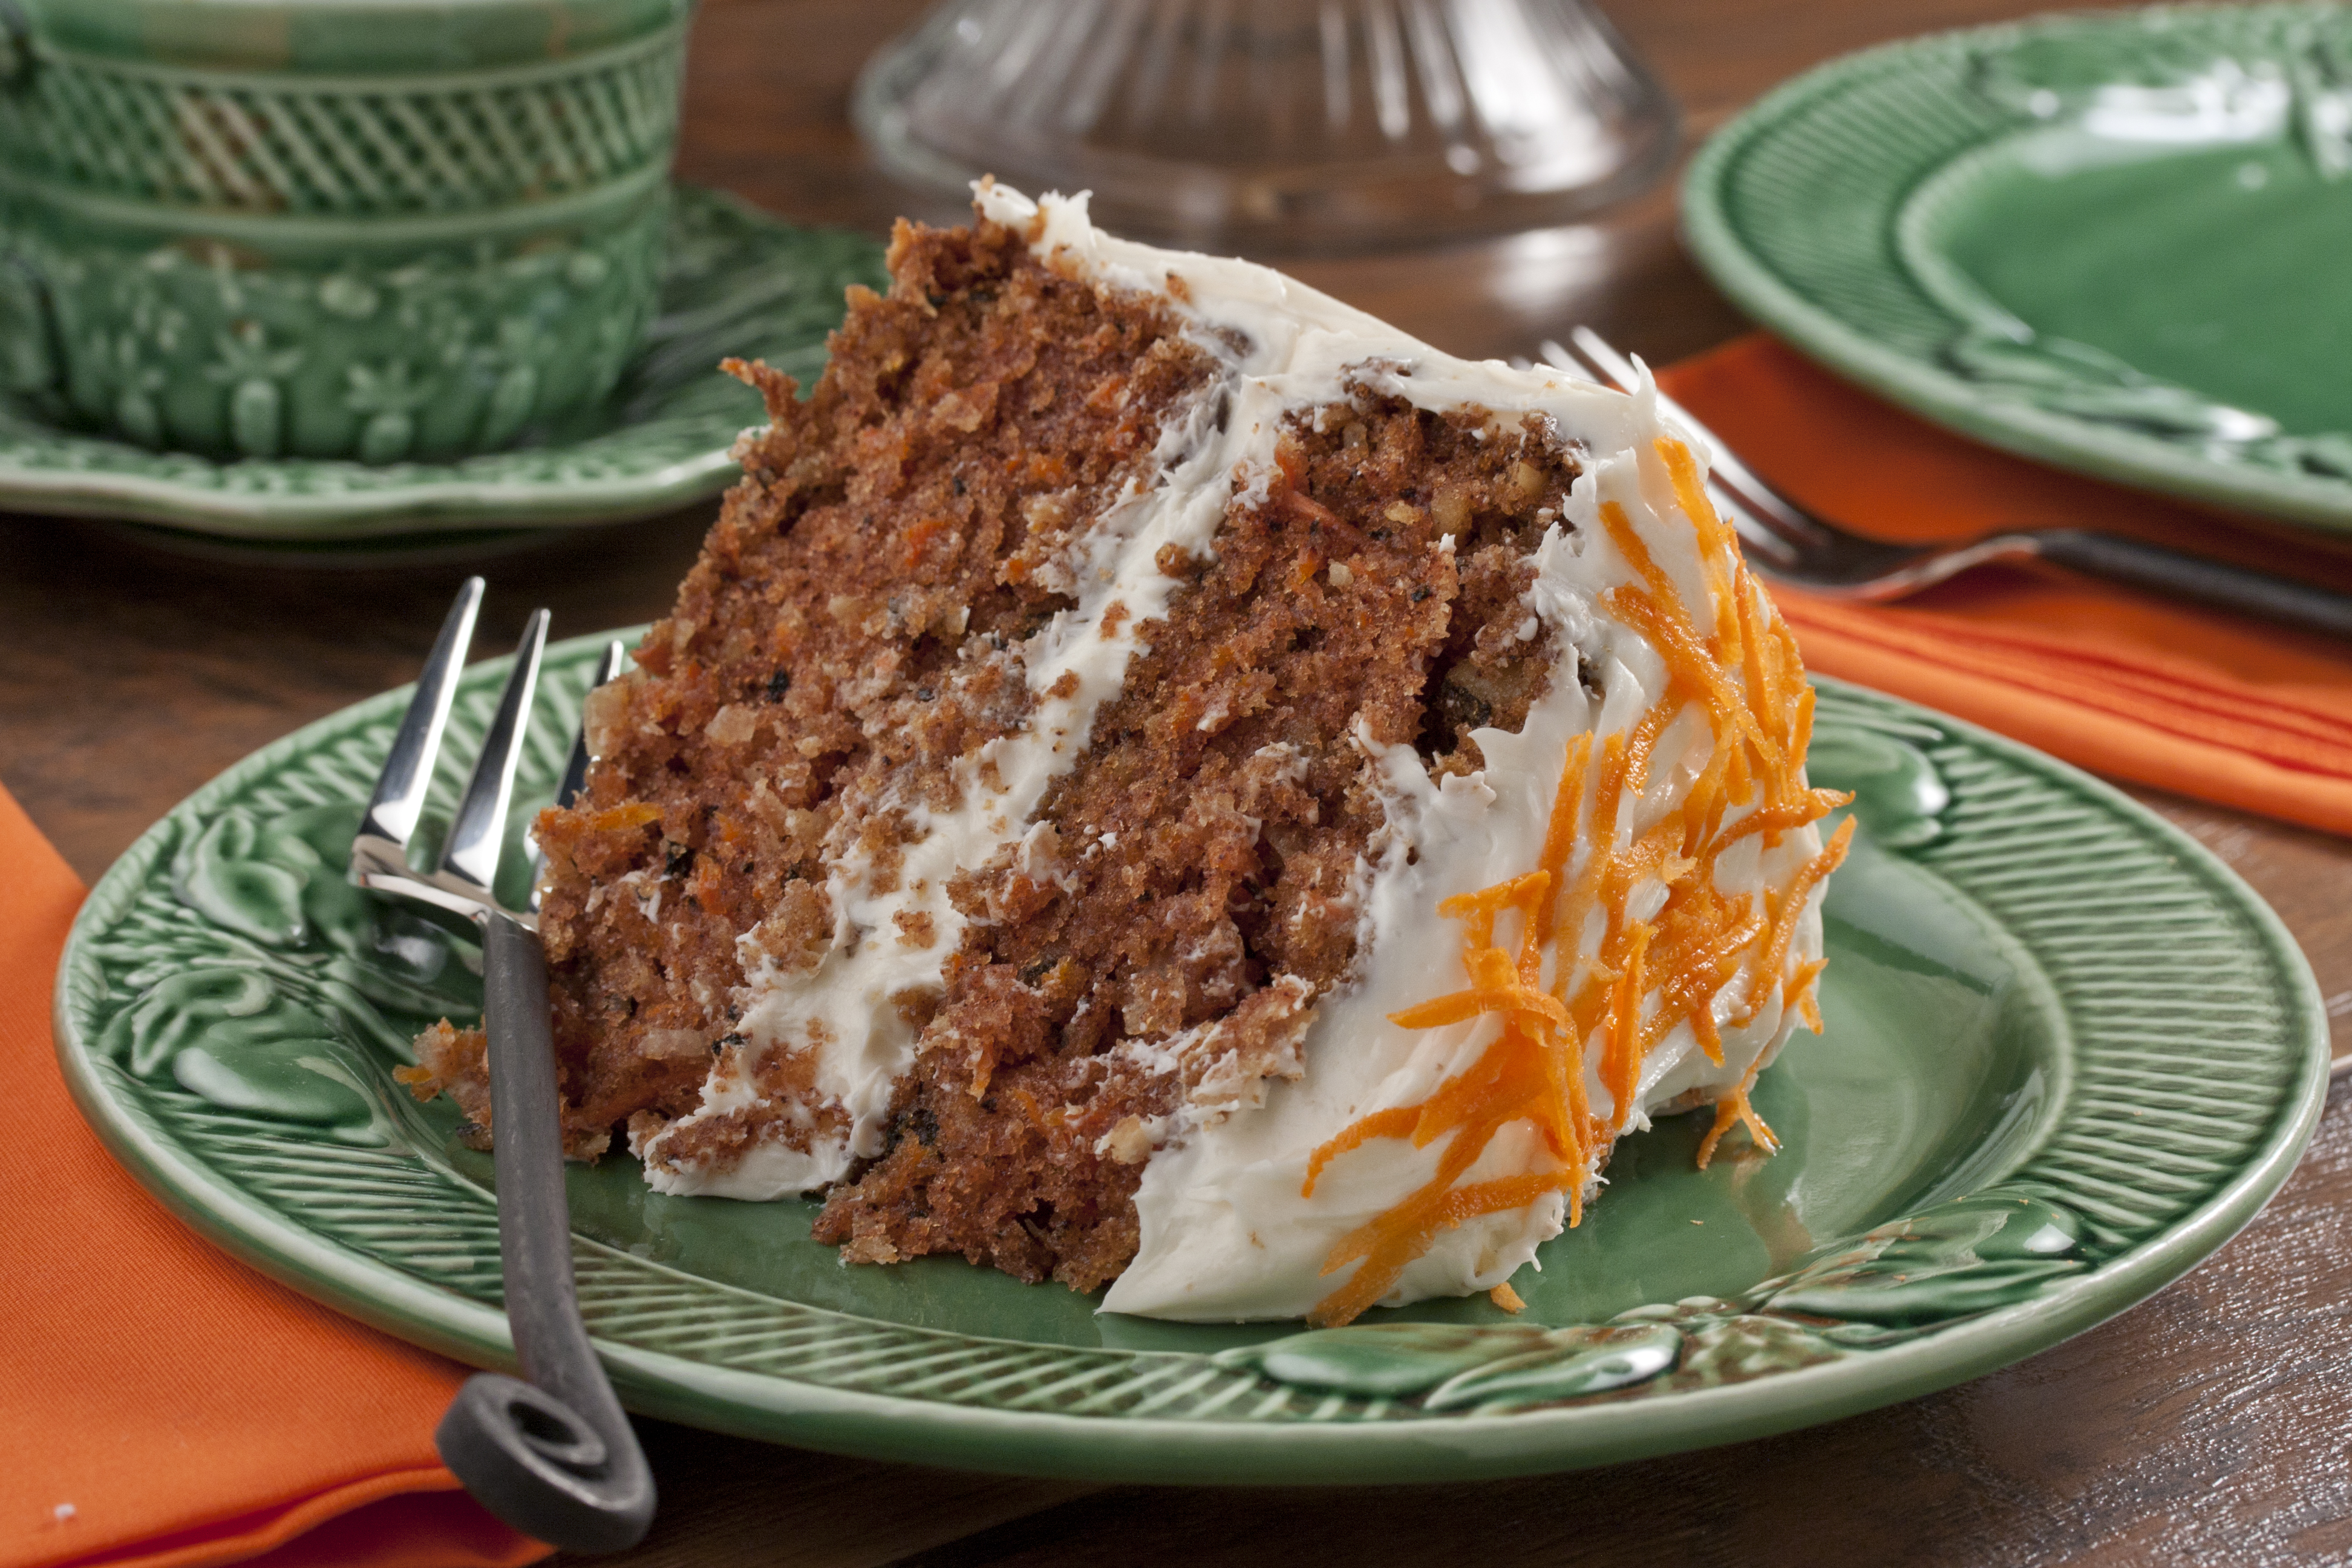 I Bake on Mondays: Carrot Cake (from a box!)